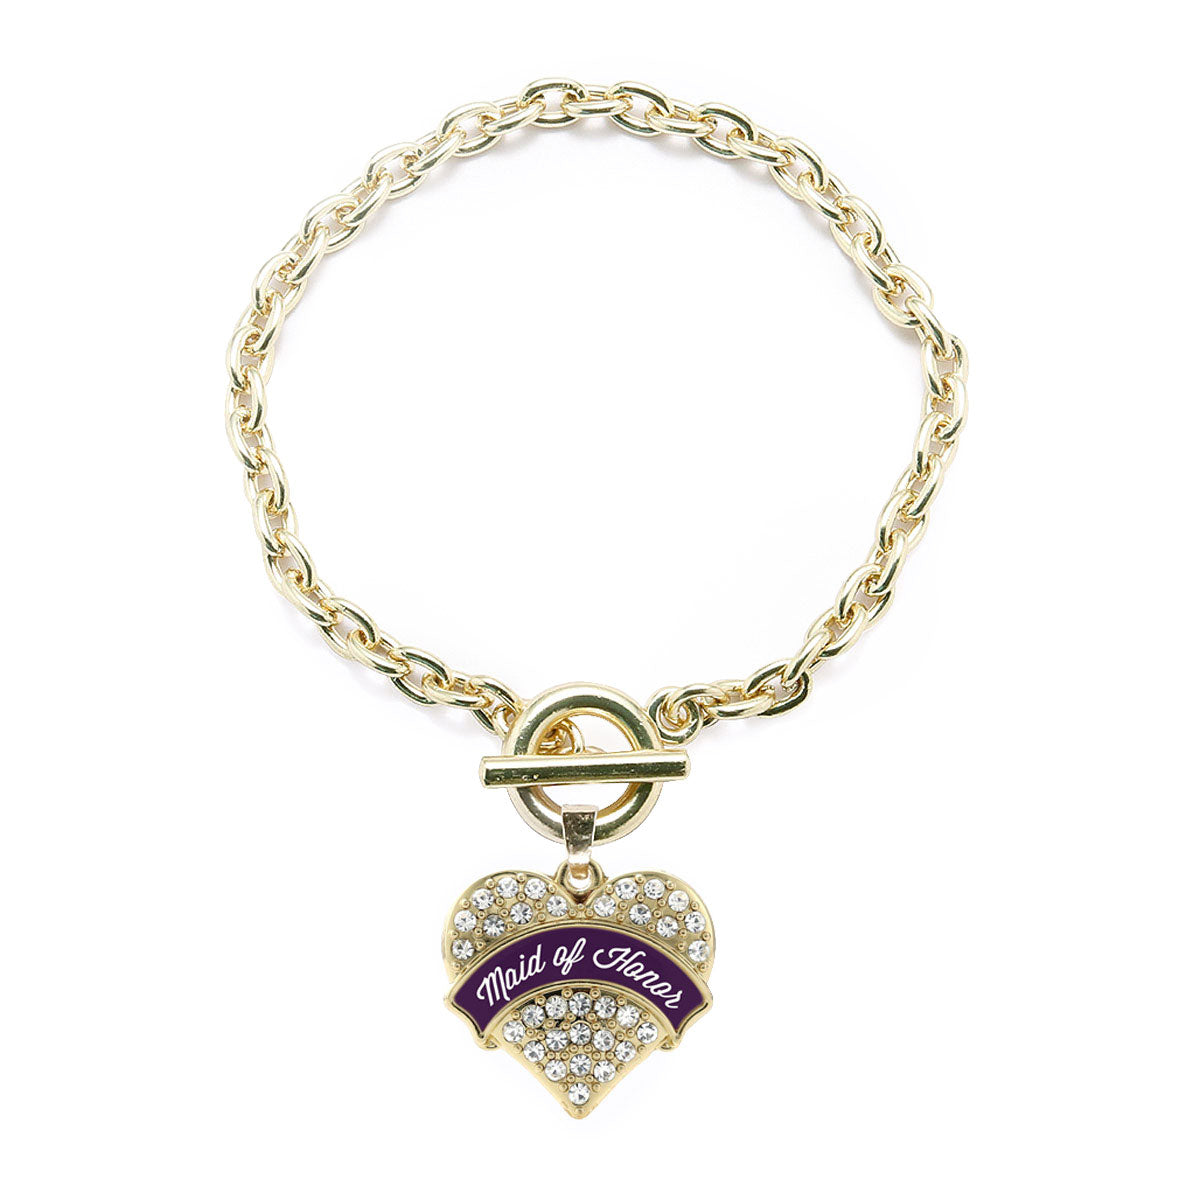 Gold Plum Maid of Honor Pave Heart Charm Toggle Bracelet